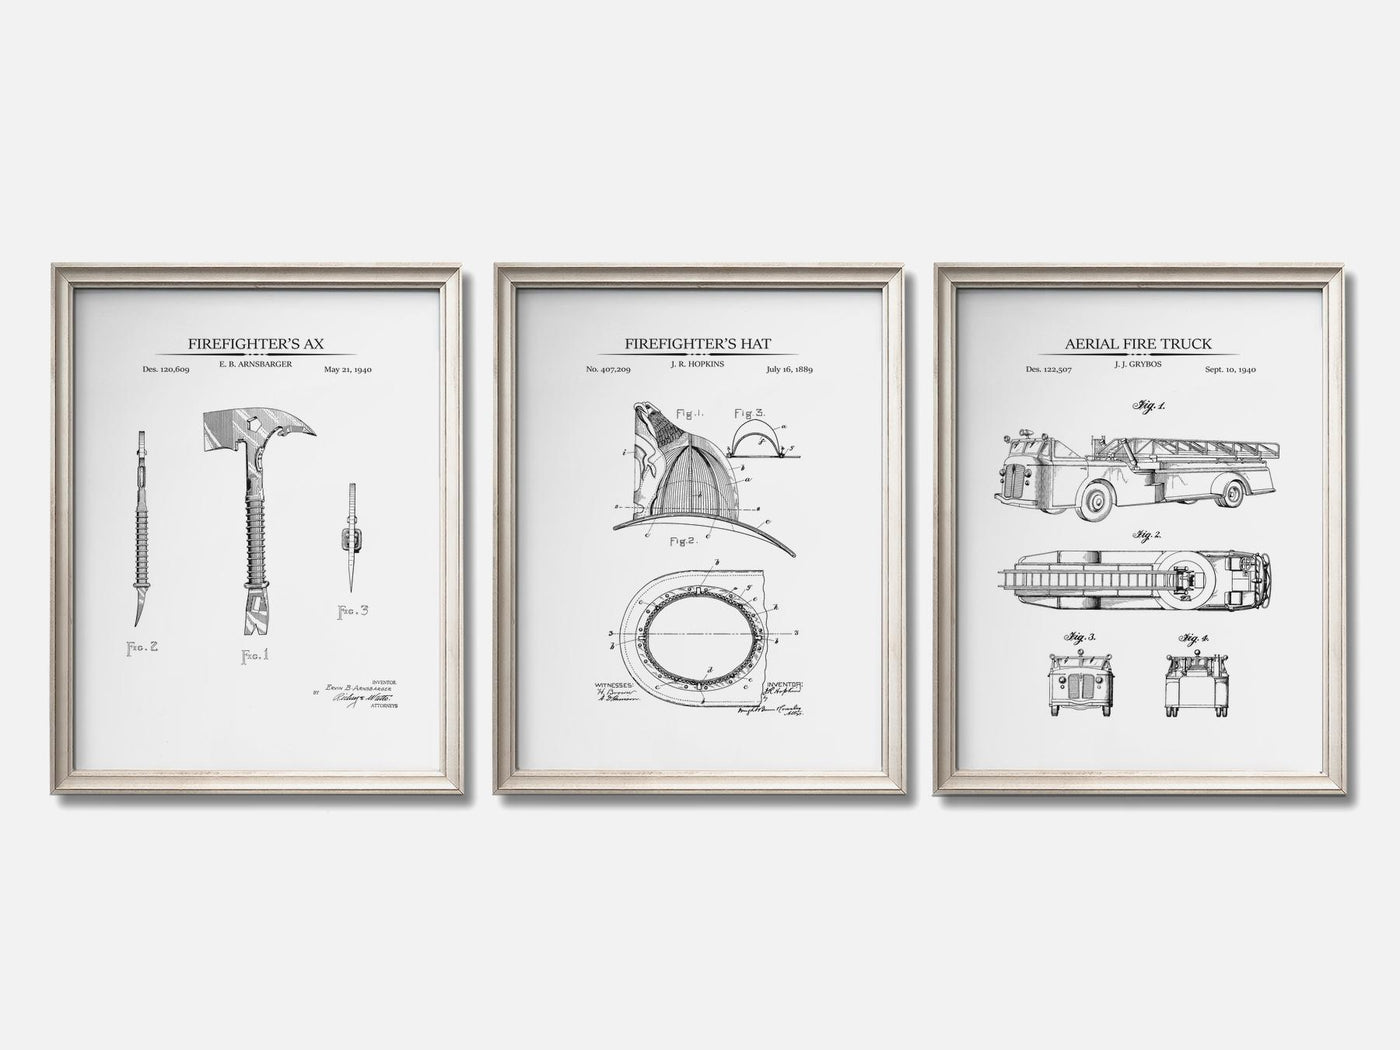 Firefighter Patent Print Set of 3 mockup - A_t10067-V1-PC_F+O-SS_3-PS_11x14-C_whi variant